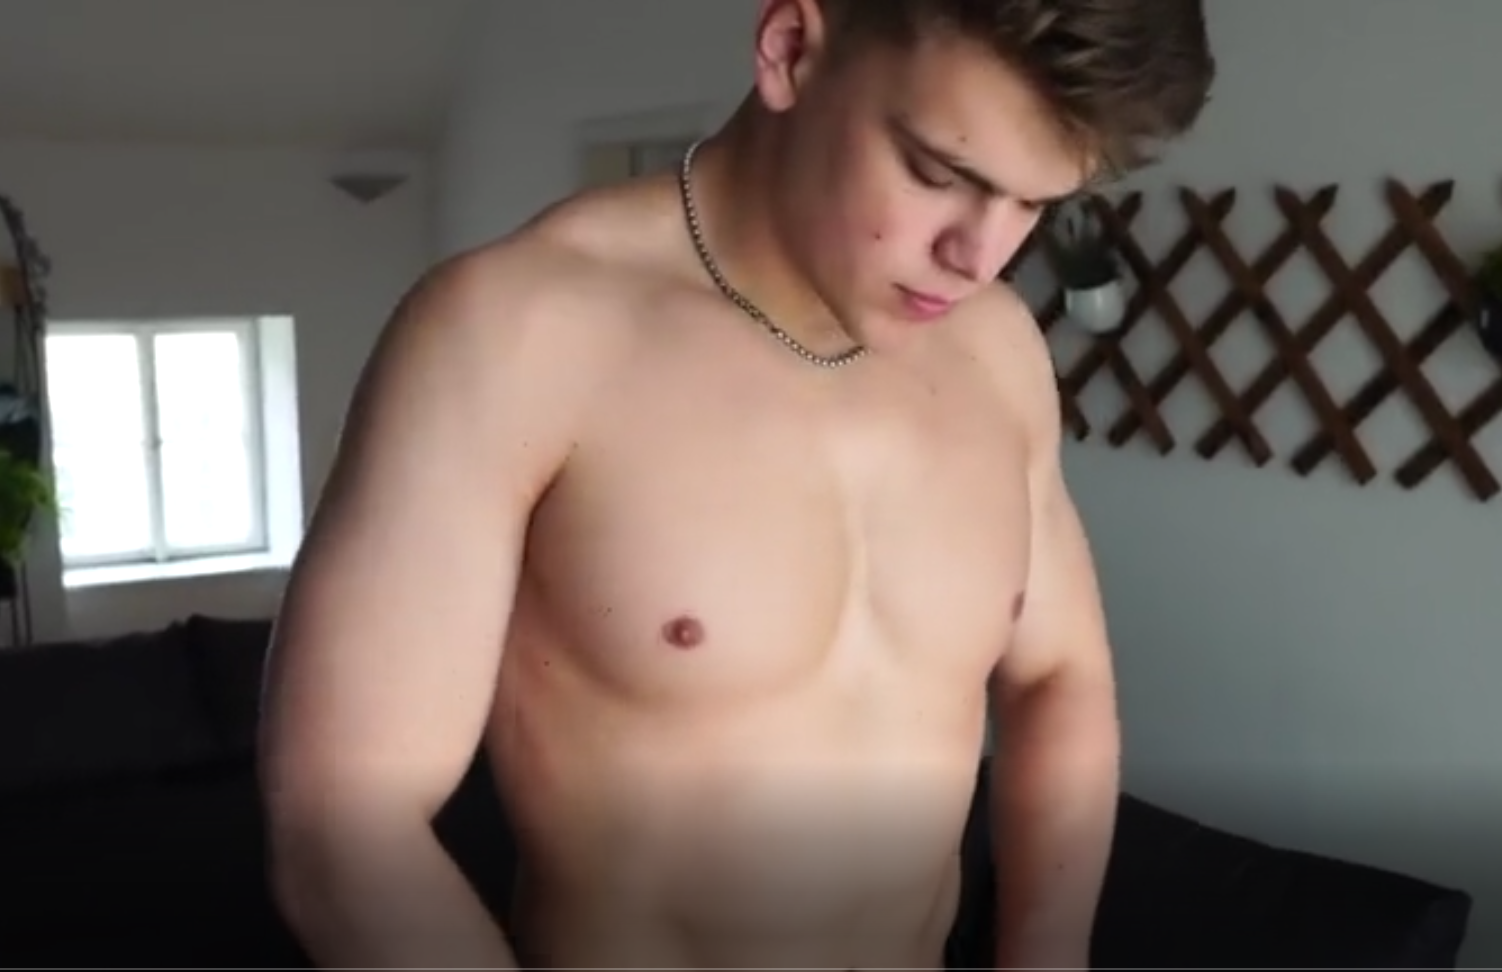 Young Twink With A Big Bubble Butt Gets Spanked And Cry - ThisVid.com